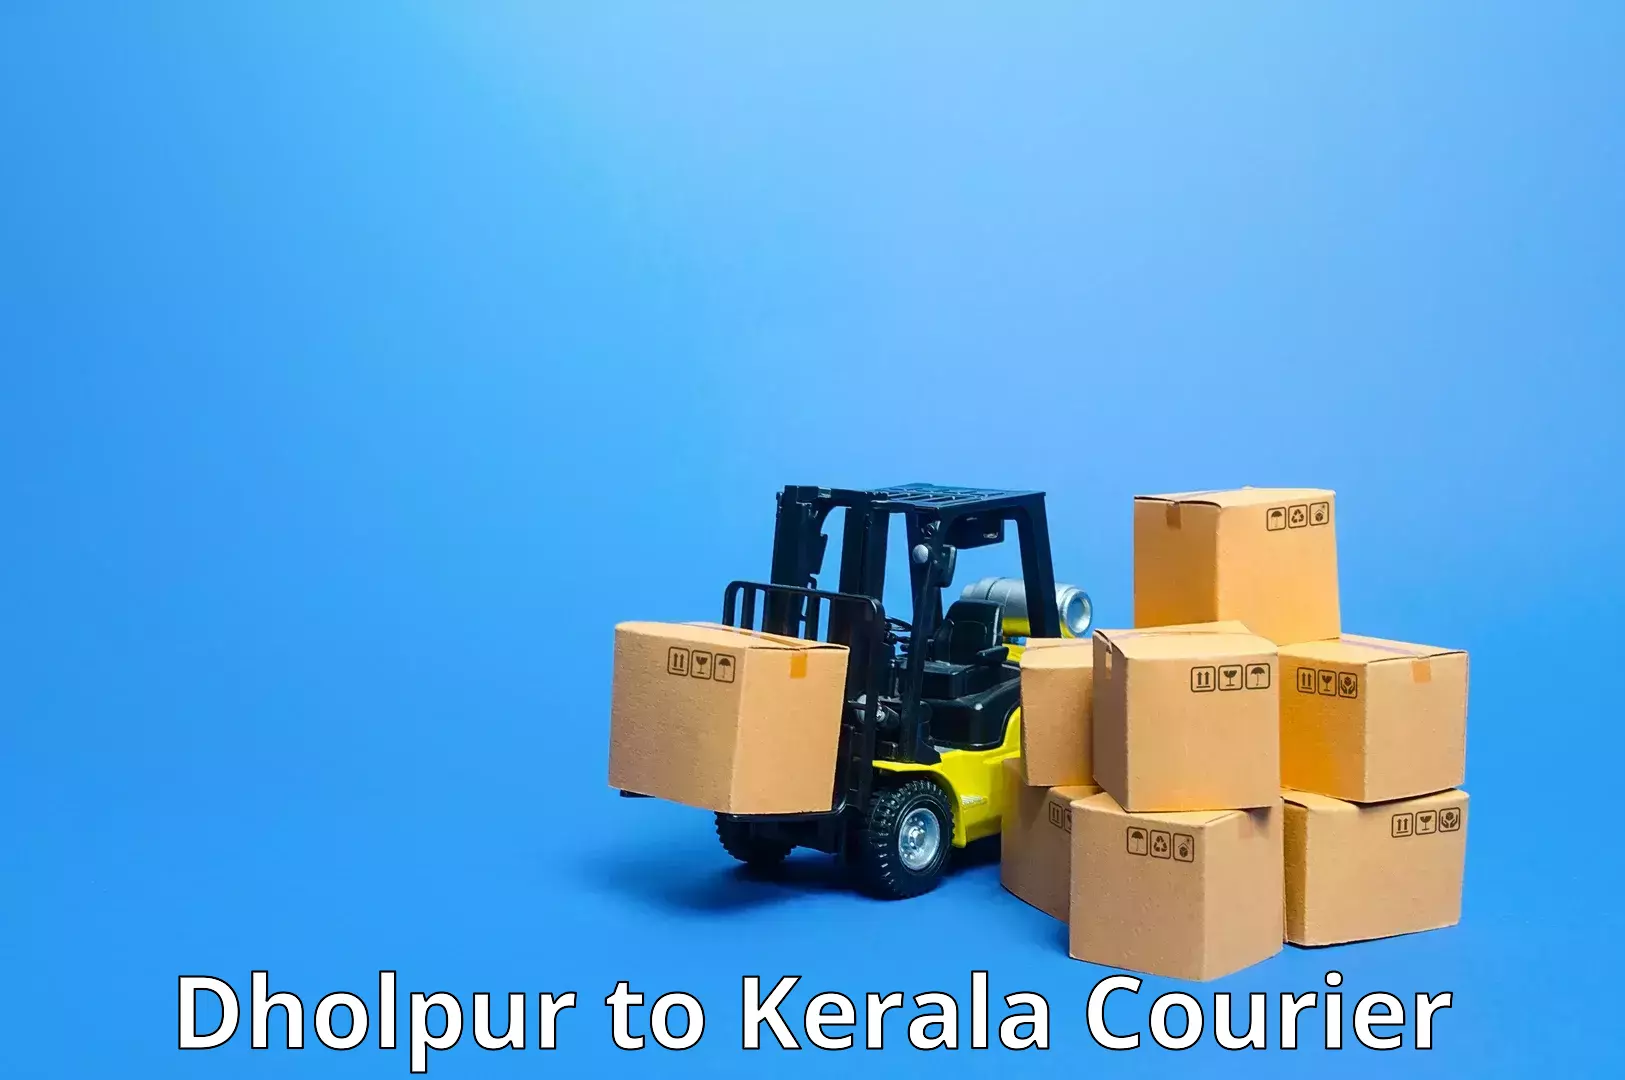 Budget-friendly shipping in Dholpur to Koothattukulam